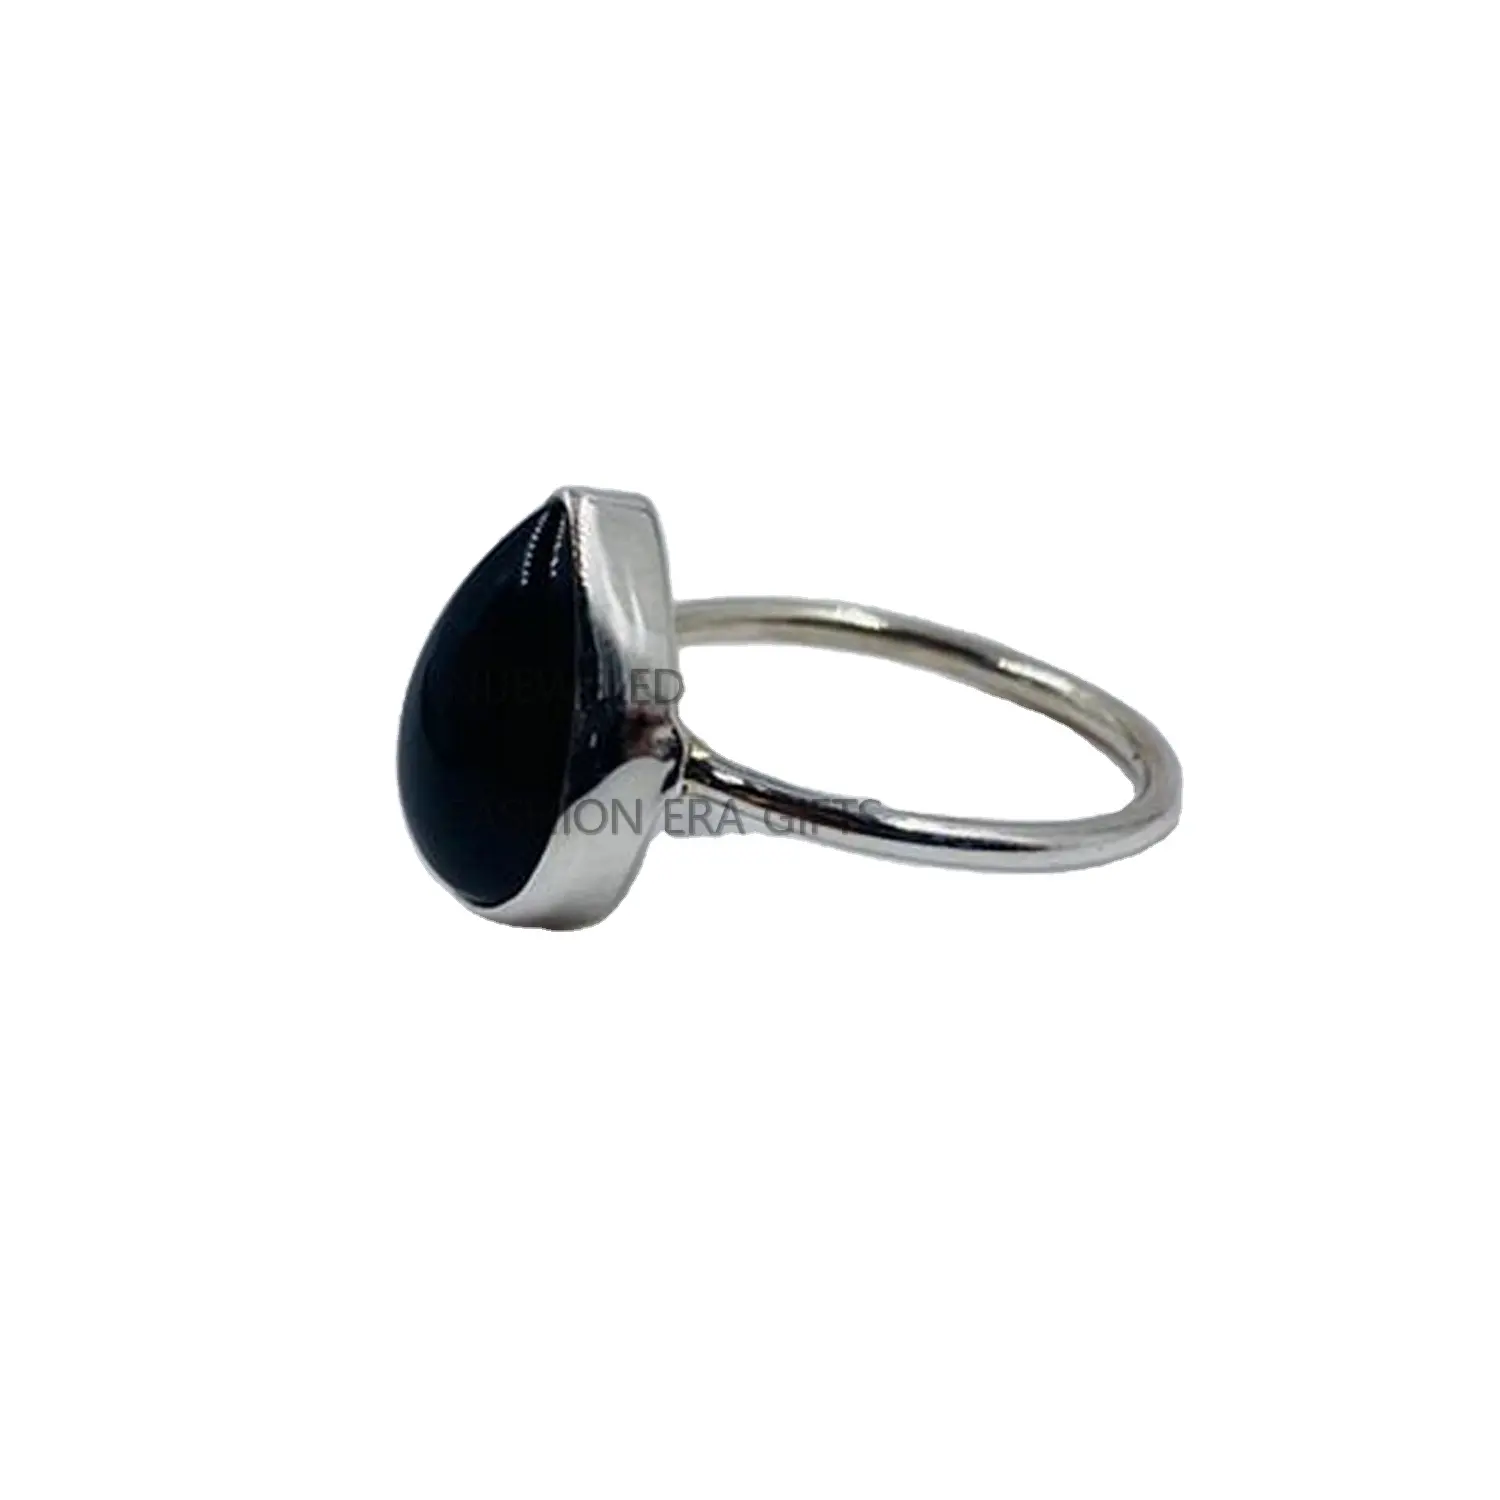 Wholesale Price Excellent Quality Natural Black Onyx Pear Cabochon 925 Solid Silver Designer Fine Rings For Women And Girls